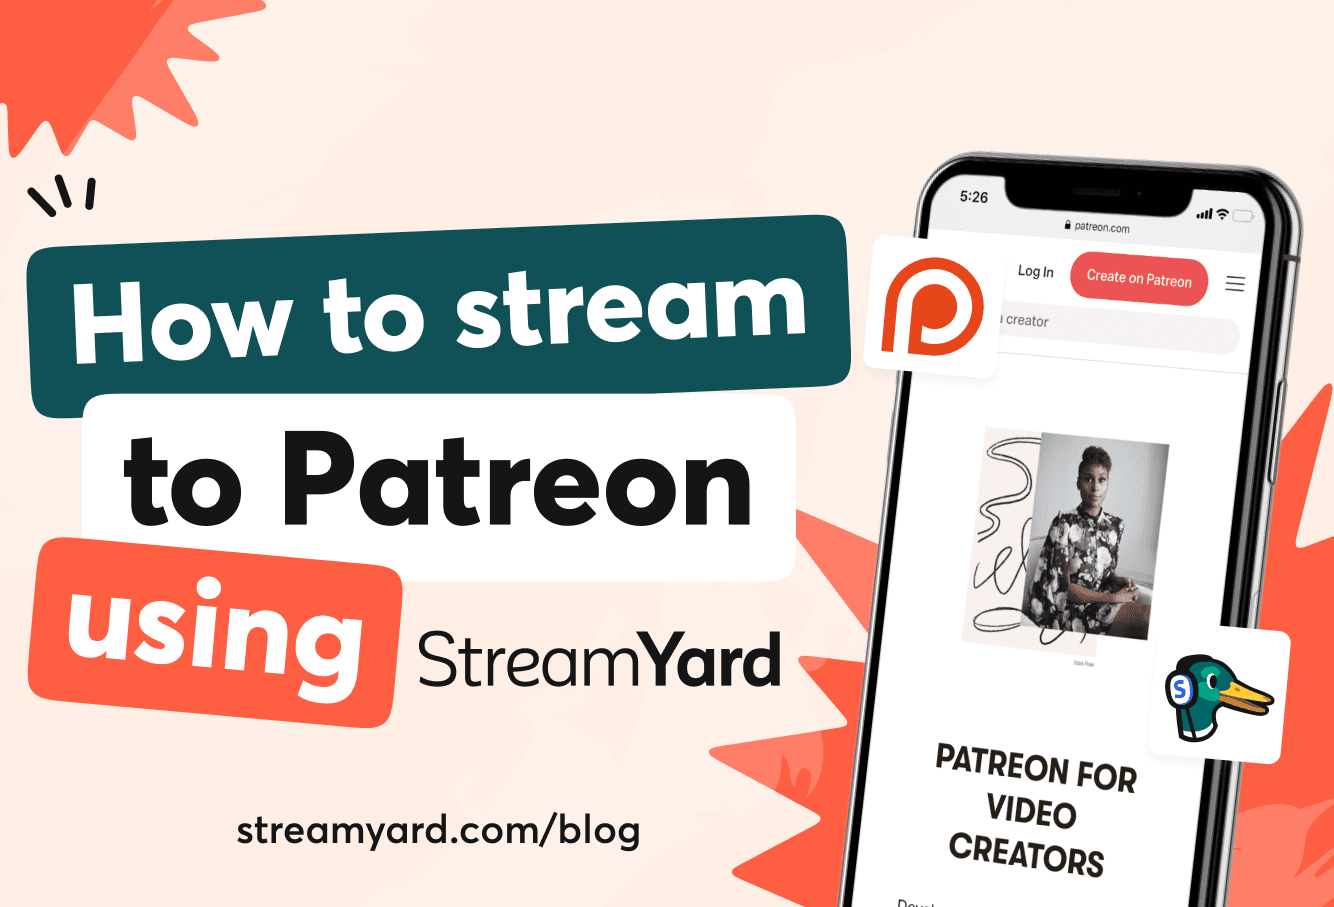 Streaming live on Patreon is easier with StreamYard. Find out how by reading this post.